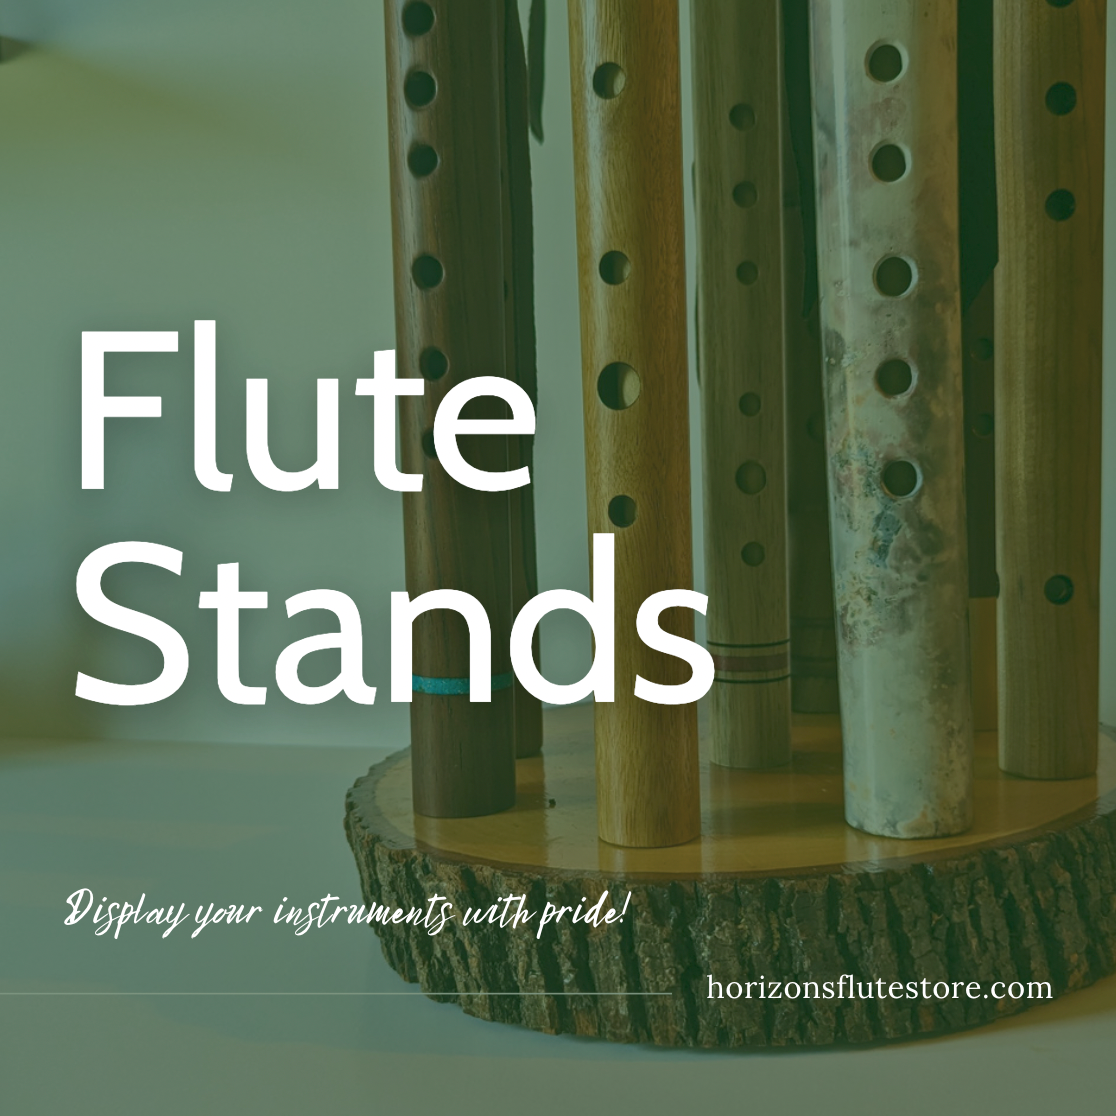 Flute Stands